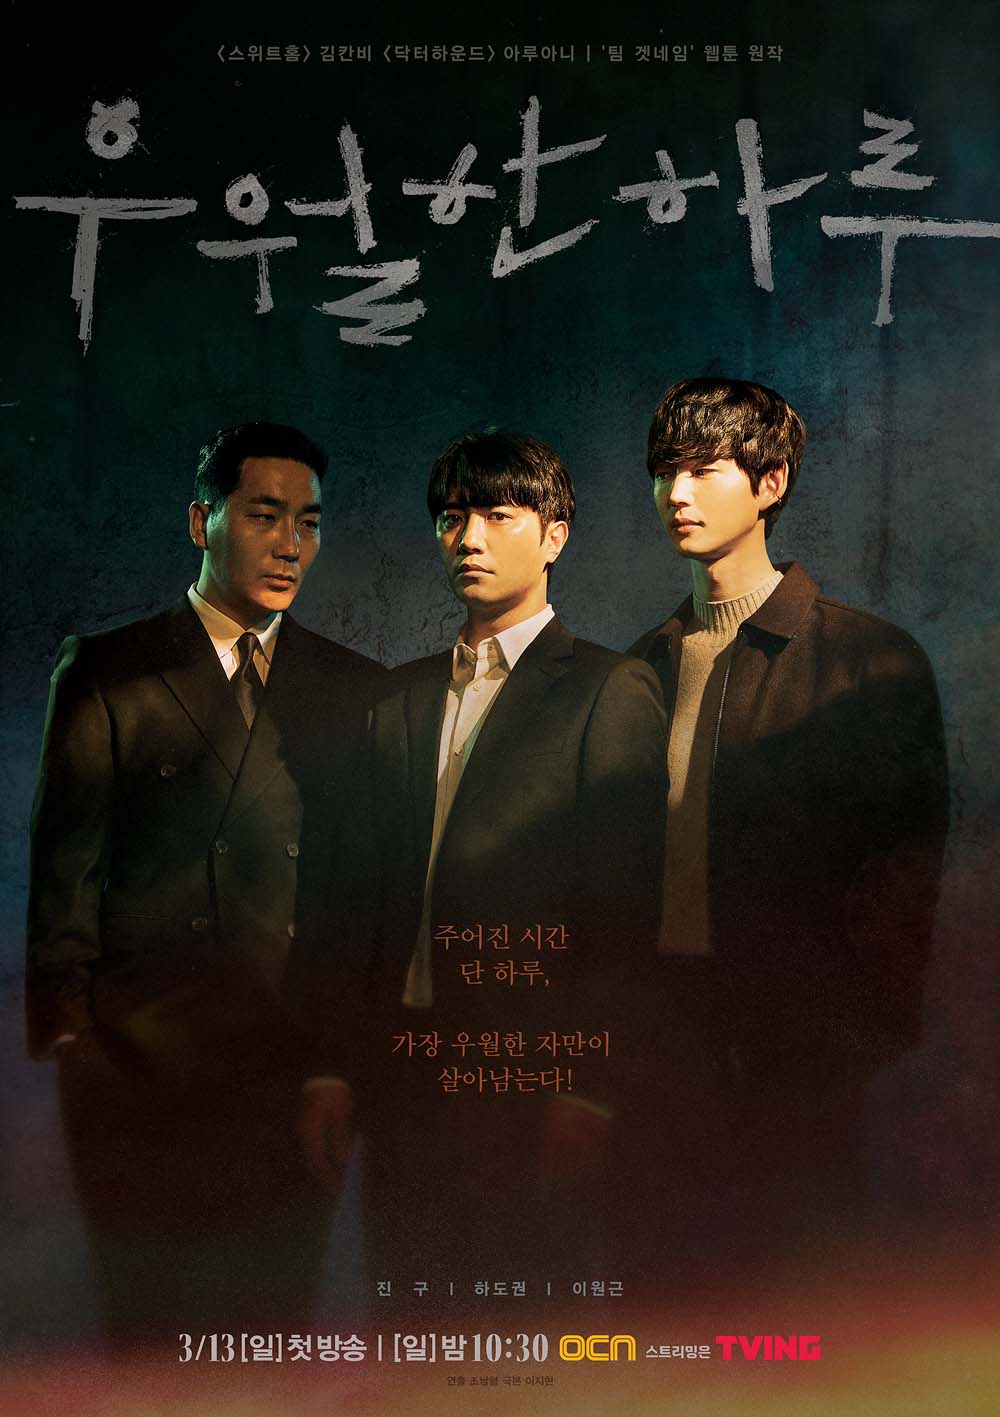 Jin Gu, Ha Do-kwon, and Lee Won-geun play a dangerous game of cat and mouse in Superior Day